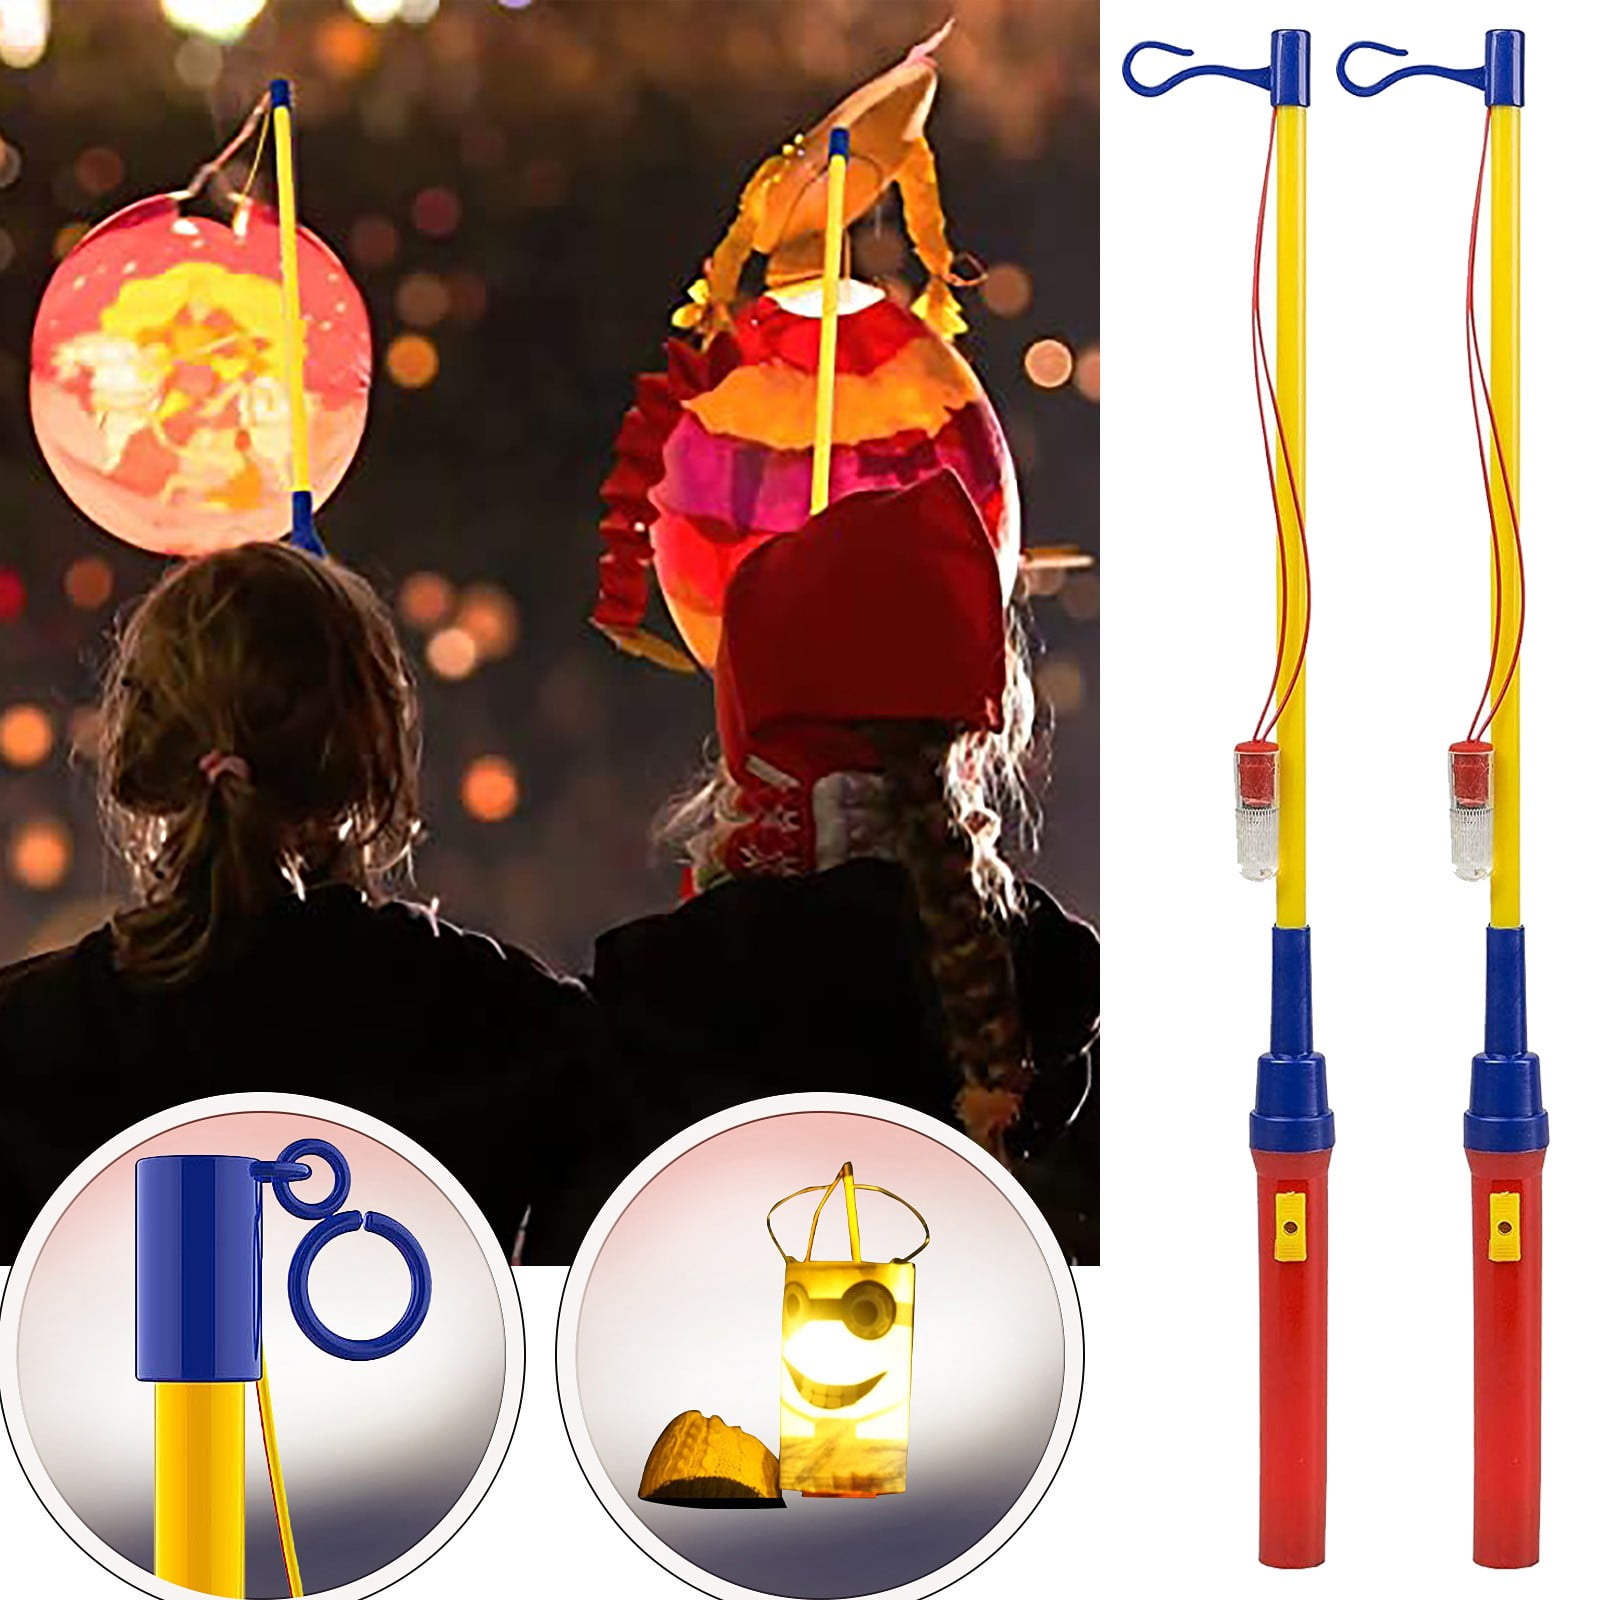 50 cm long; Colourful Battery Electric Lantern Stick With LED Hook For Lanterns Relaxdays Kids Lantern Pole Set Of 2 